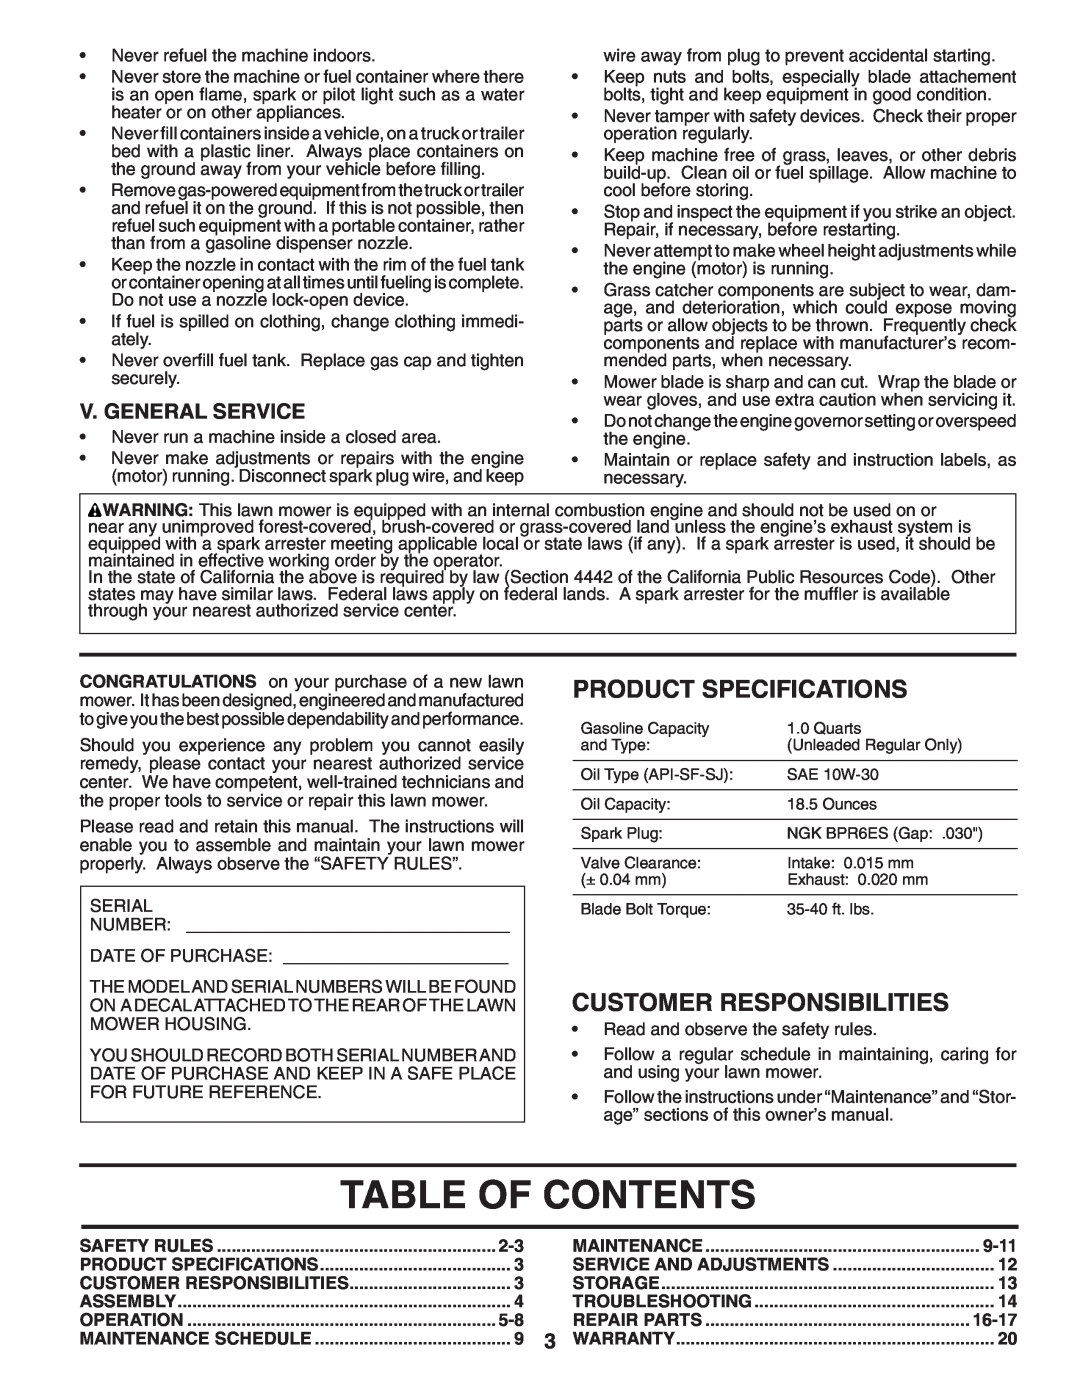 Husqvarna 7021P Table Of Contents, Product Specifications, Customer Responsibilities, V. General Service, 9-11, 16-17 